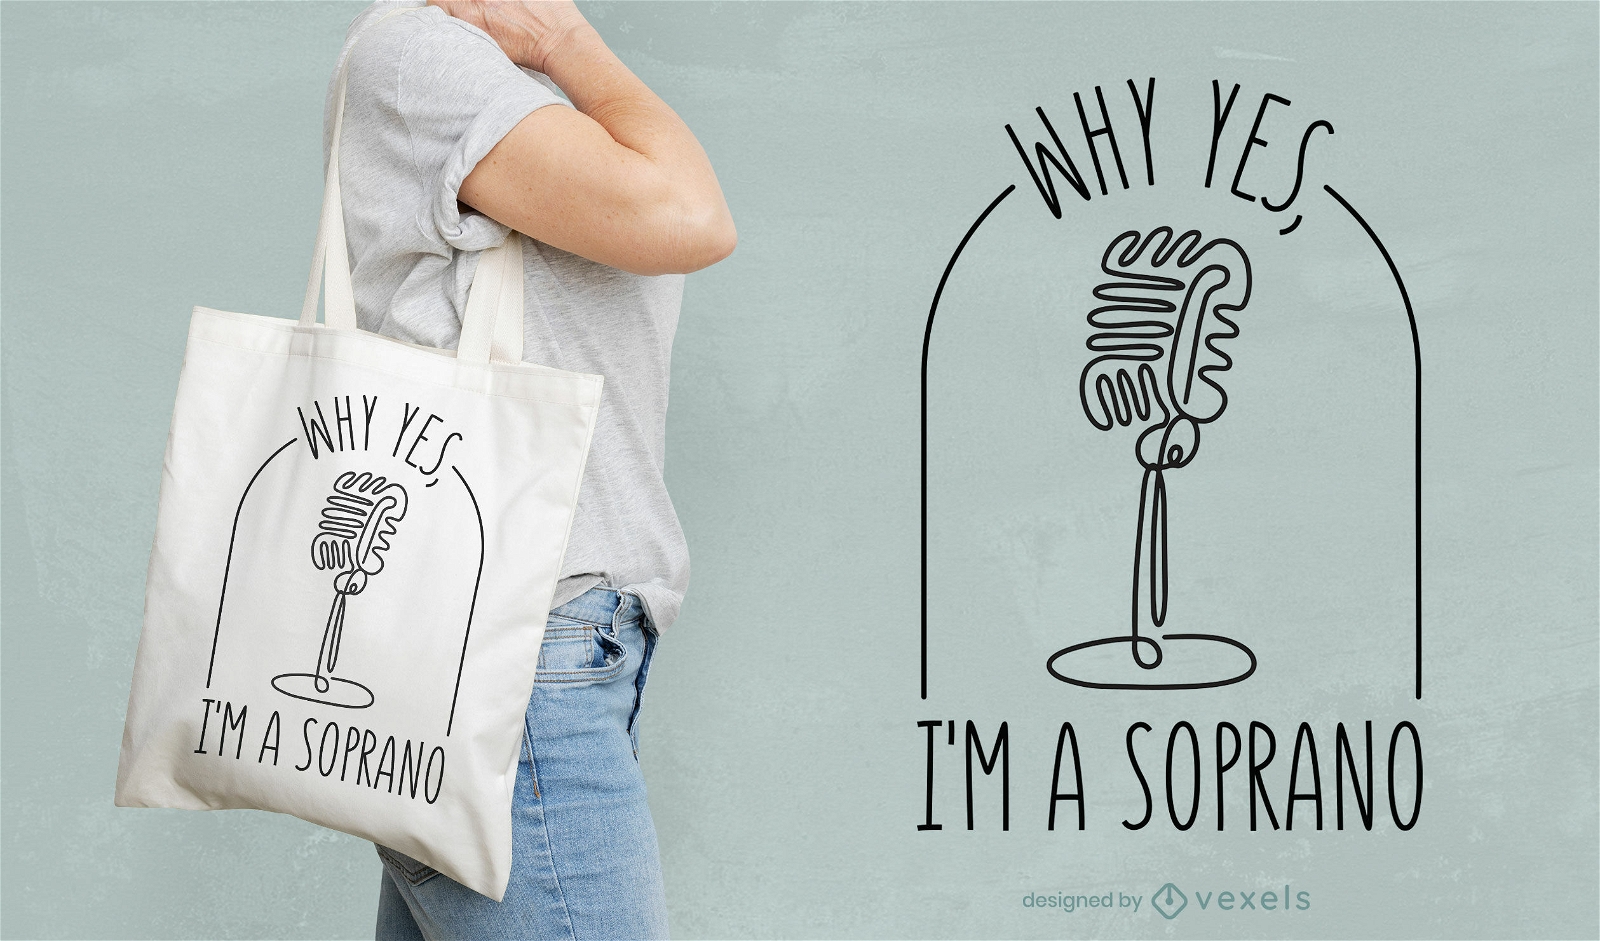 Musical instrument microphone tote bag design